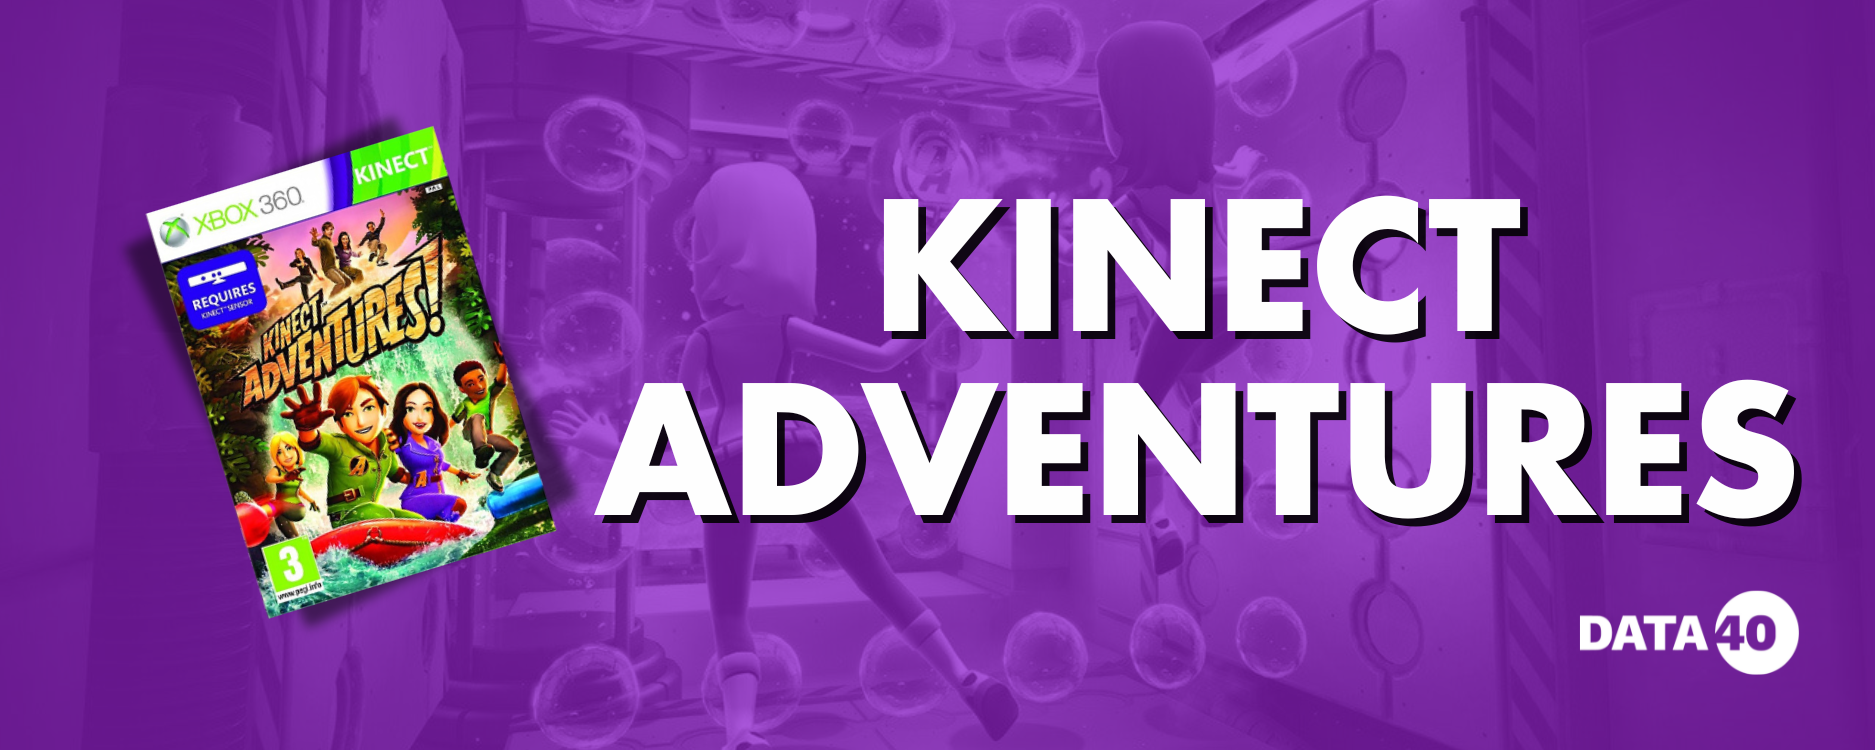 Kinect Adventures(1)